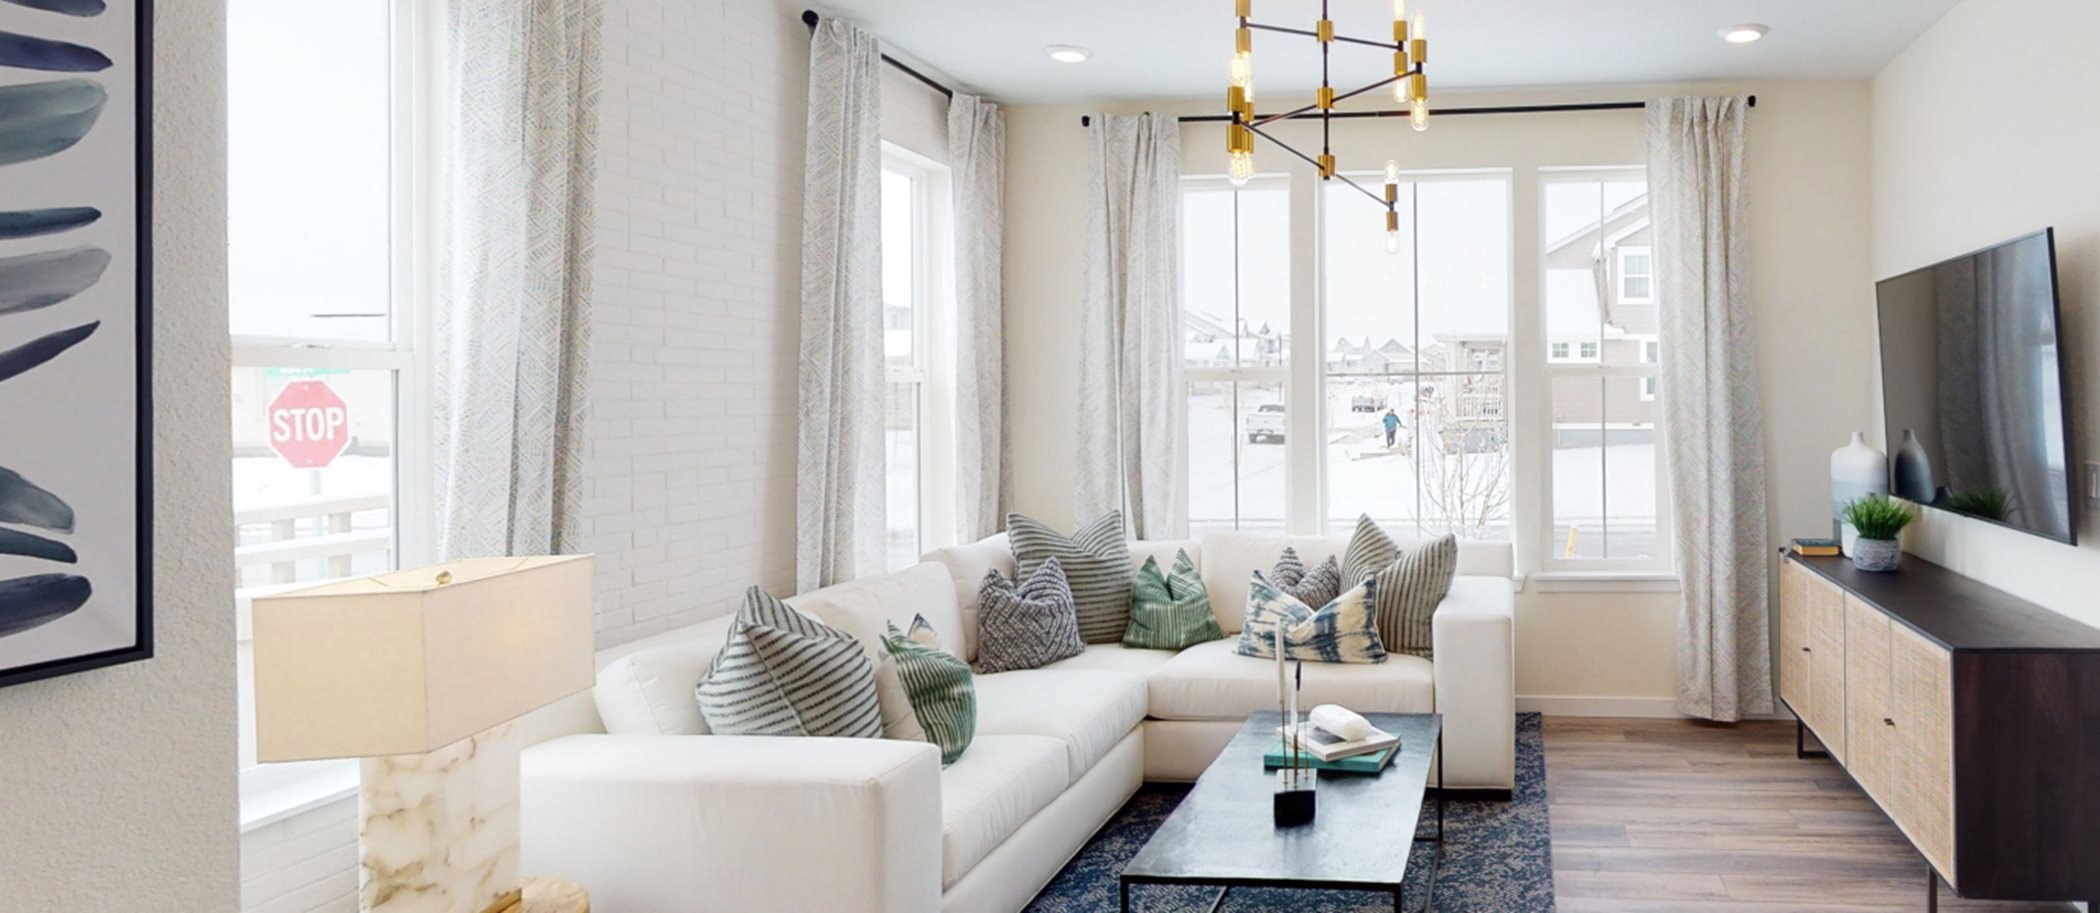 Compass Paired Homes Vibrant- Right Living Room